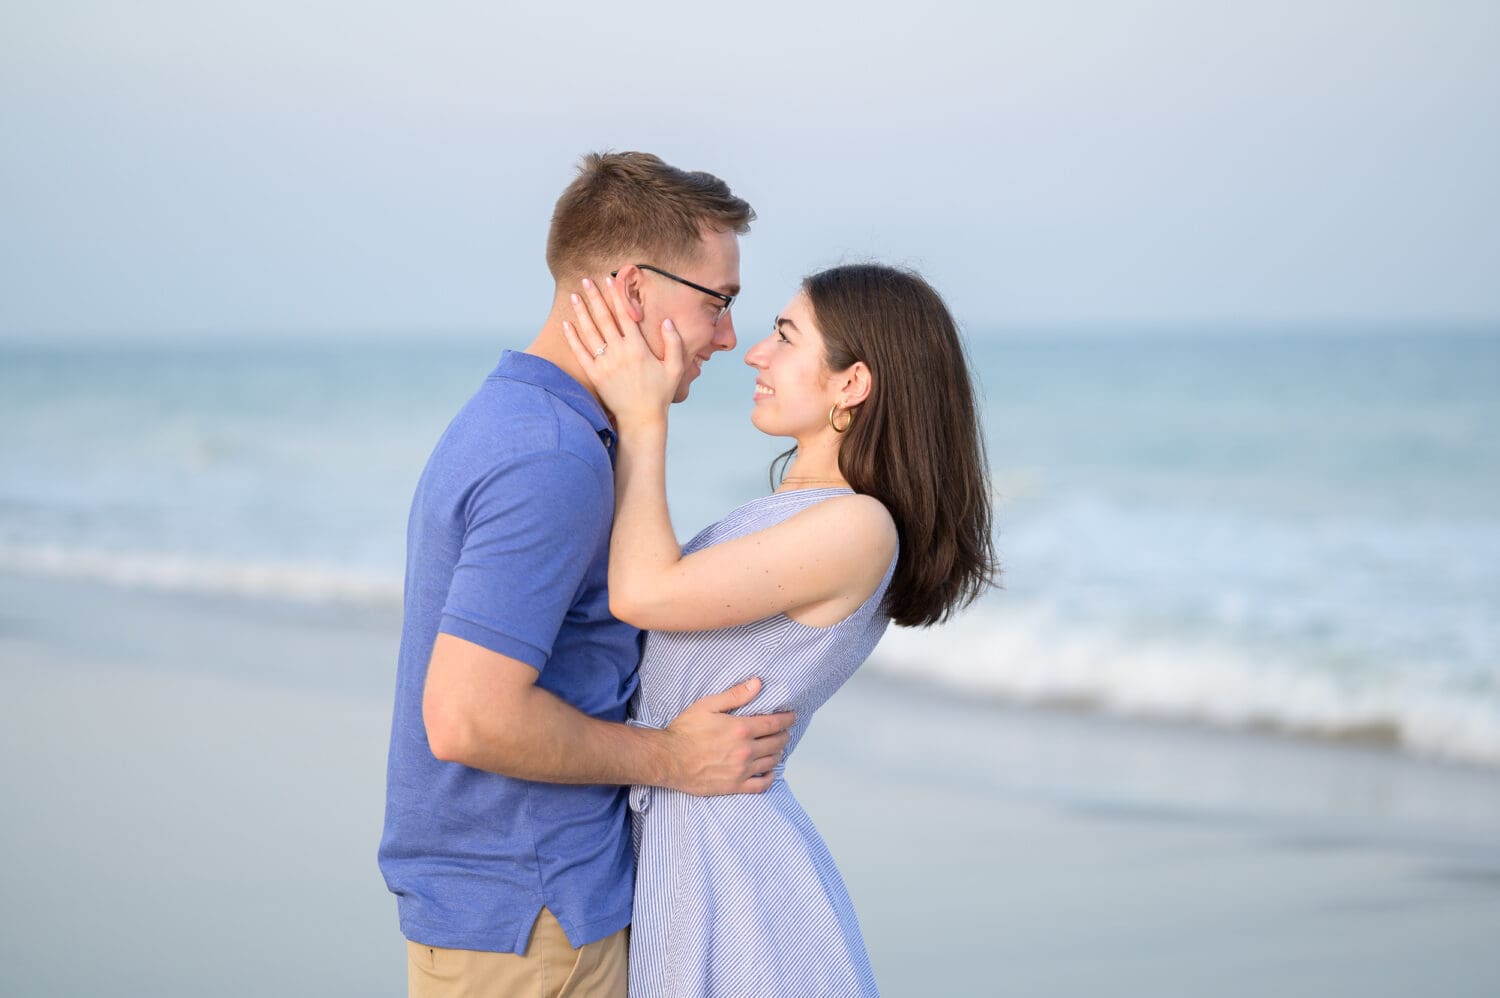 Summer surprise proposal with a beautiful sunset by the ocean - Huntington Beach State Park